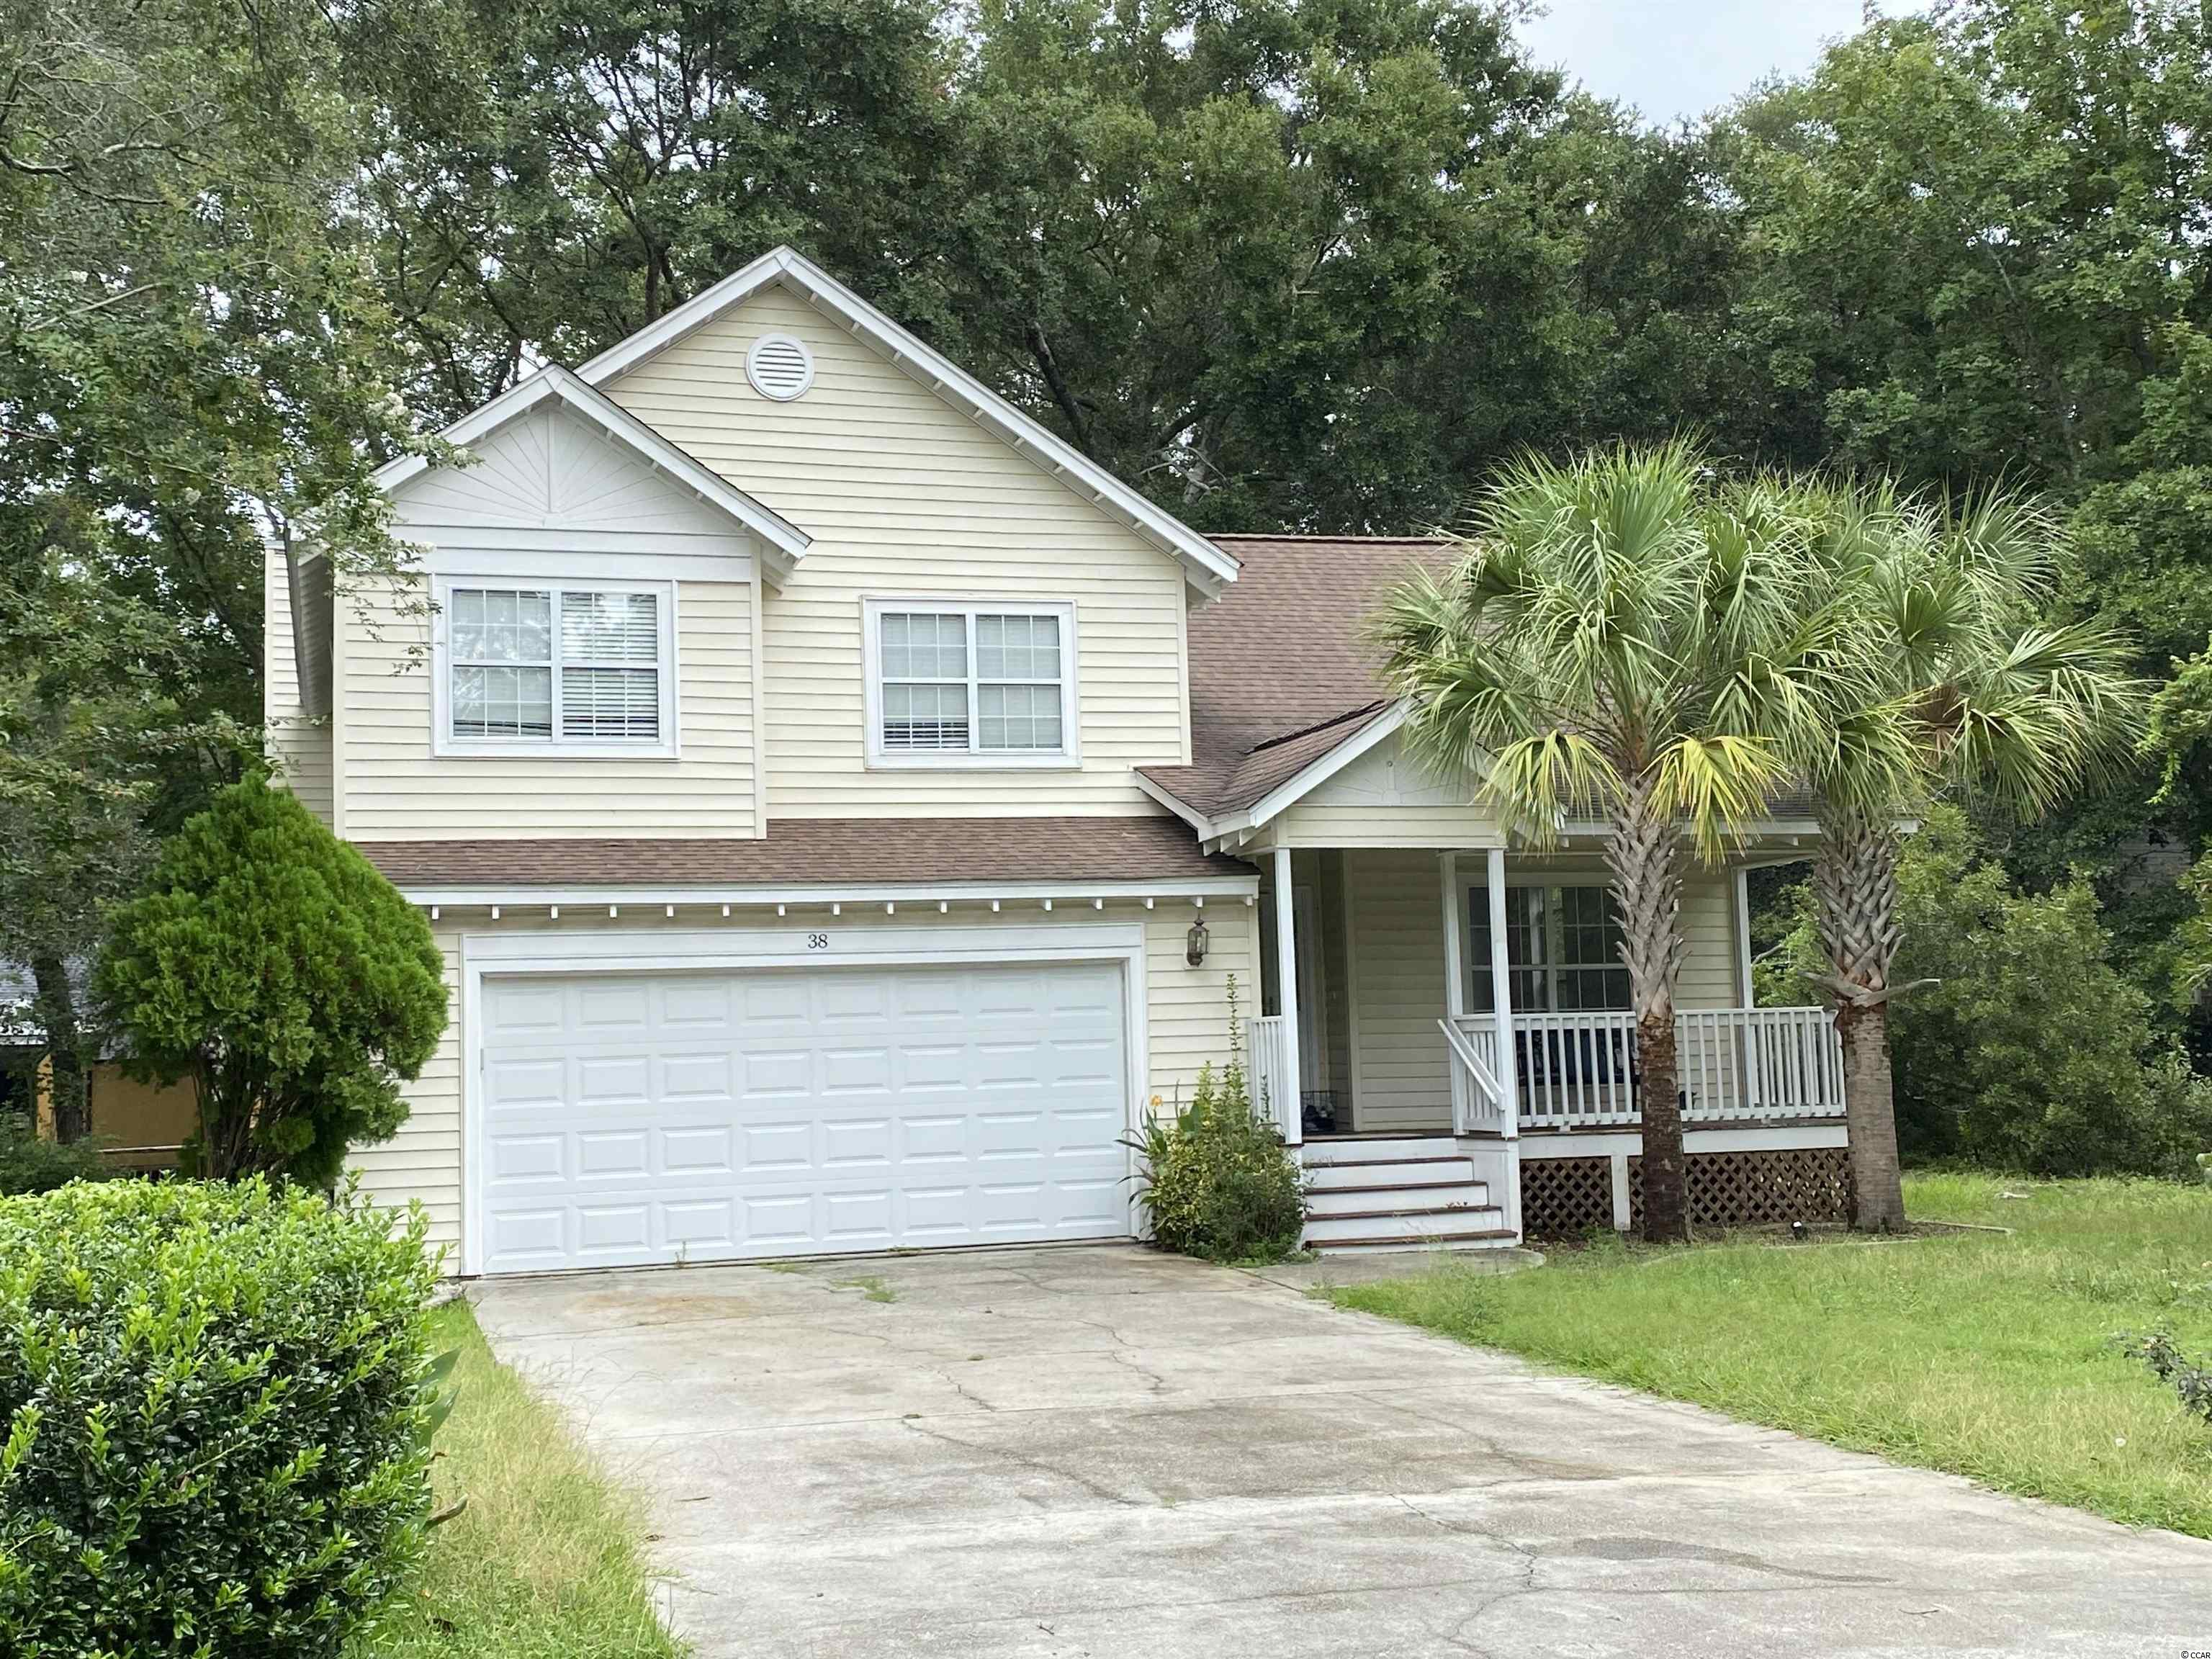 38 Voyagers Dr. Pawleys Island, SC 29585